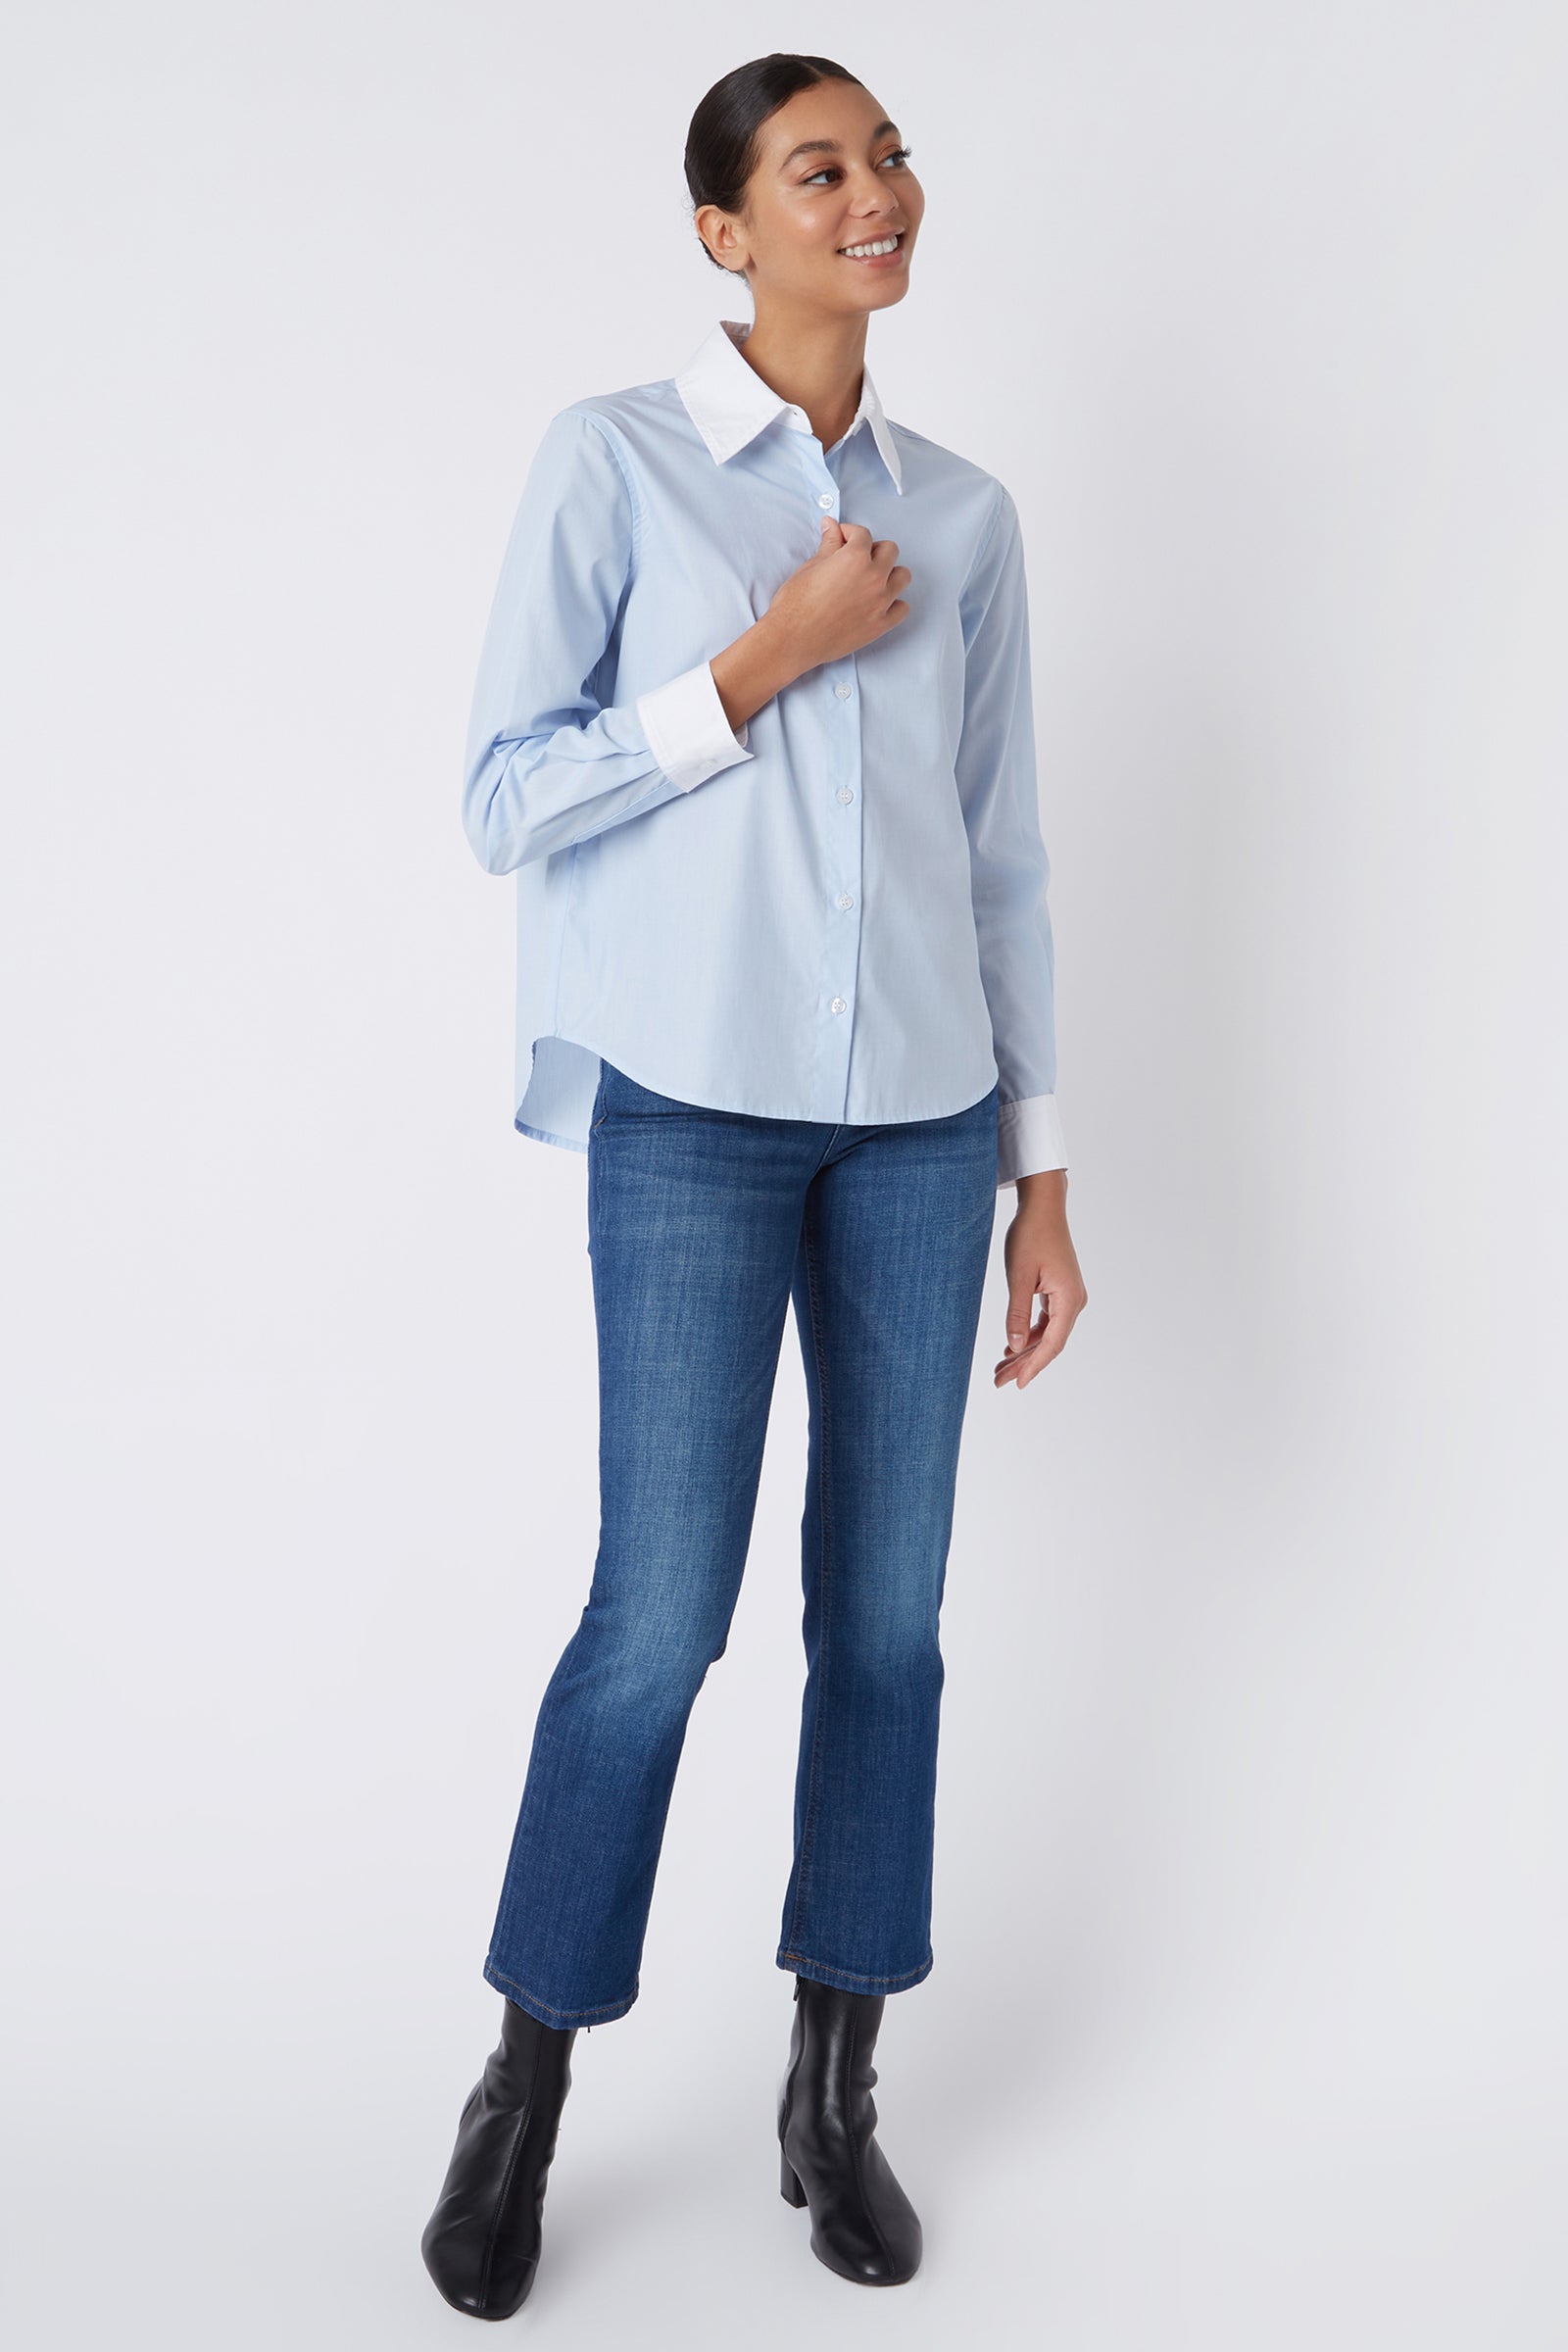 Kal Rieman Classic Tailored Shirt in Oxford Blue on Model Looking Left Full Front View